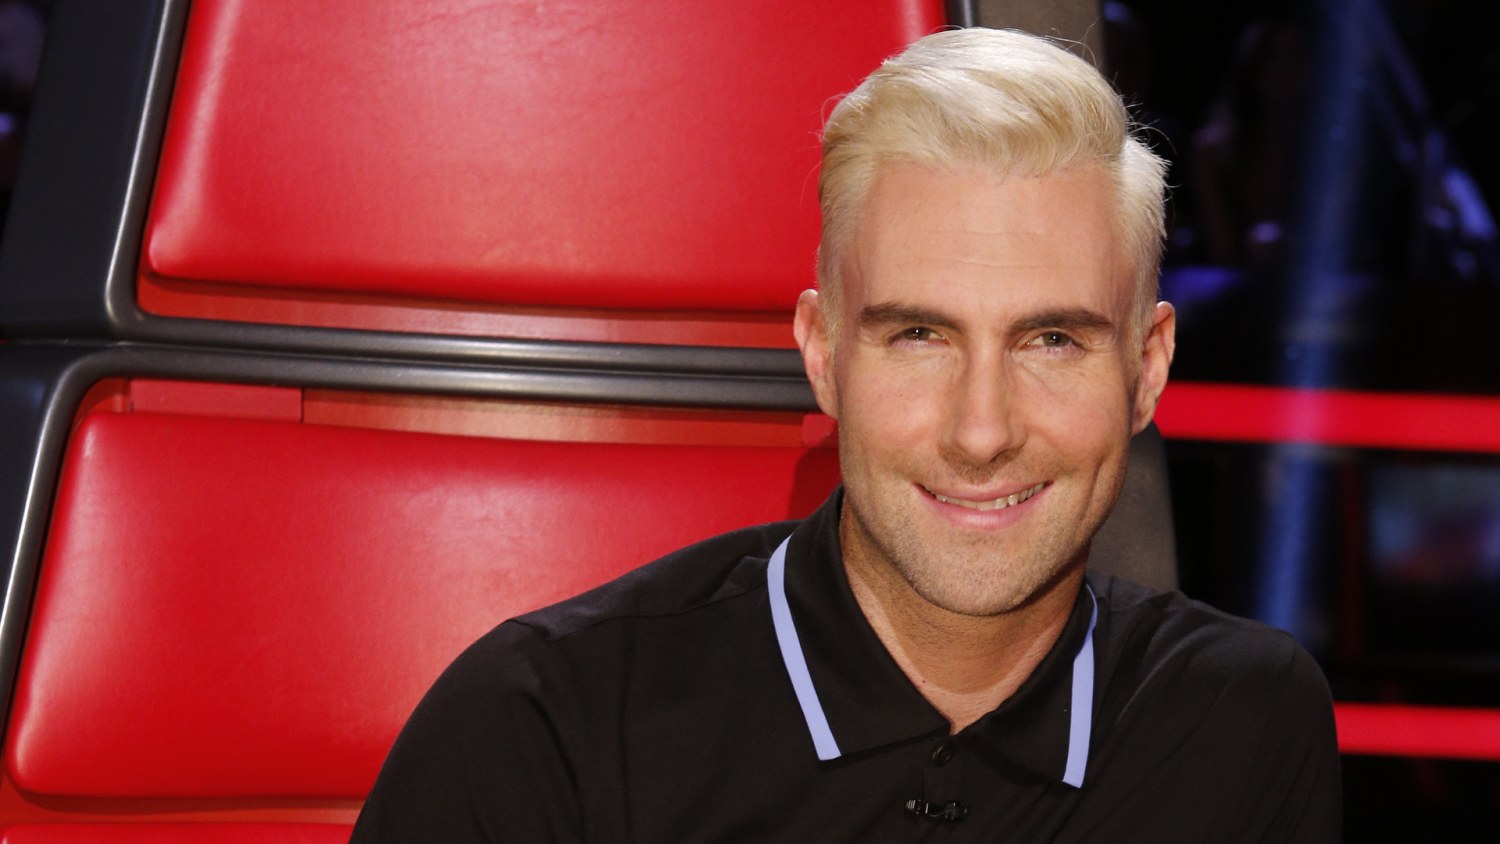 Adam Levine Picks His Favorite Holiday Gifts for Men